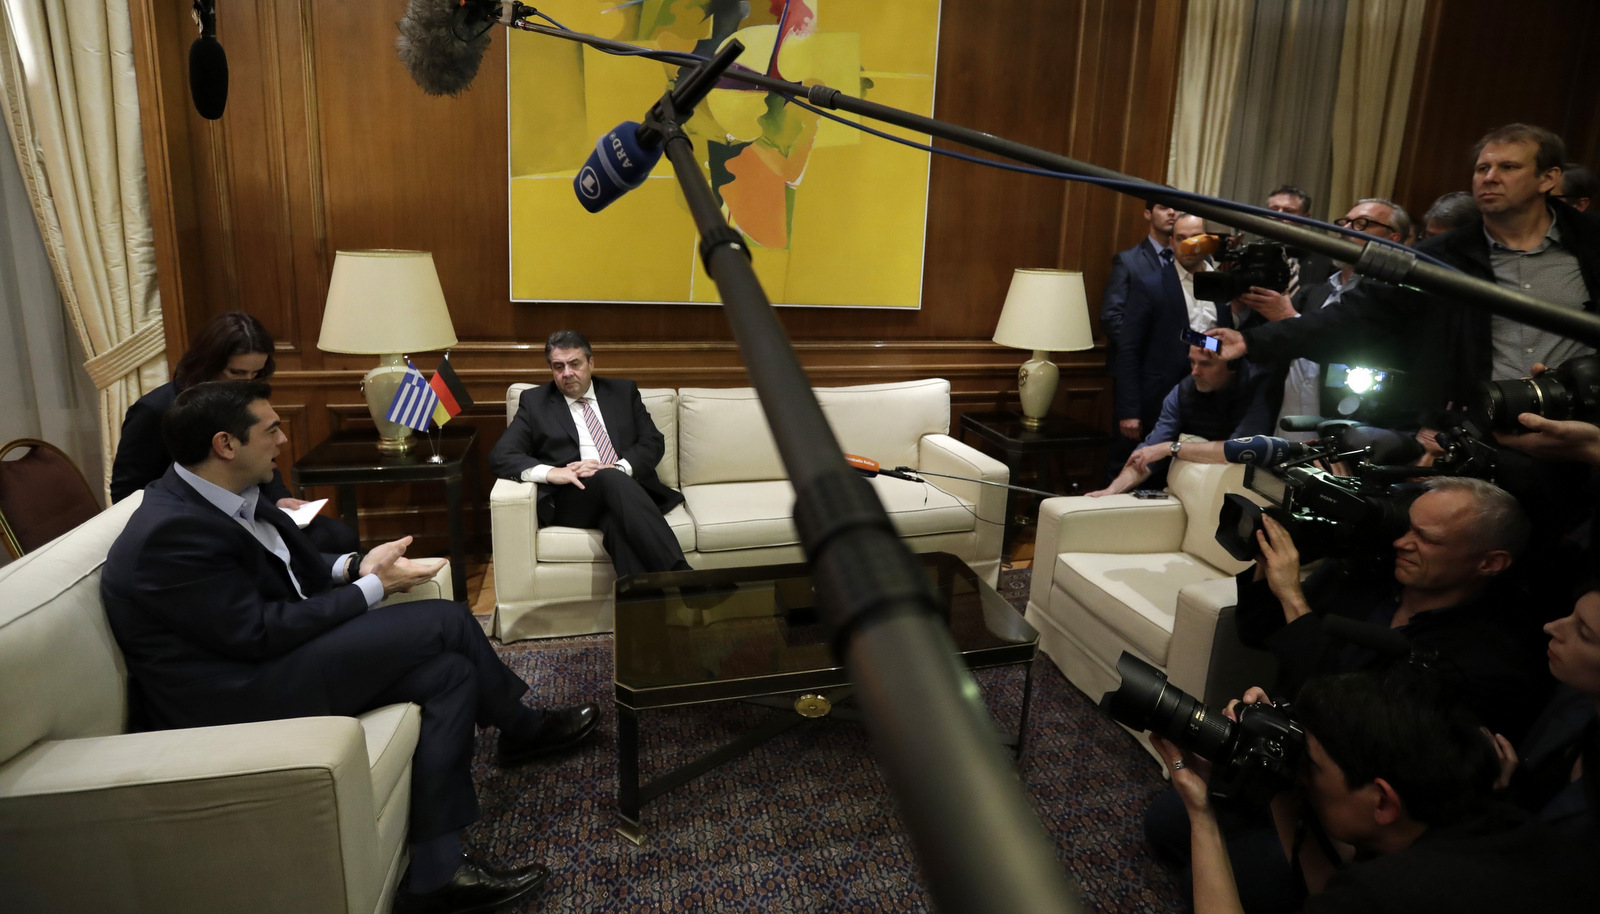 Greece's Prime Minister Alexis Tsipras, left, speaks with German Foreign Minister Sigmar Gabriel during their meeting at Maximos Mansion in Athens, March 22, 2017. Gabriel is in Greece on a two-day visit as he is suggesting his country could offer to pay more money into the European Union, arguing that investing in Europe is "an investment in our own future." (AP/Thanassis Stavrakis)